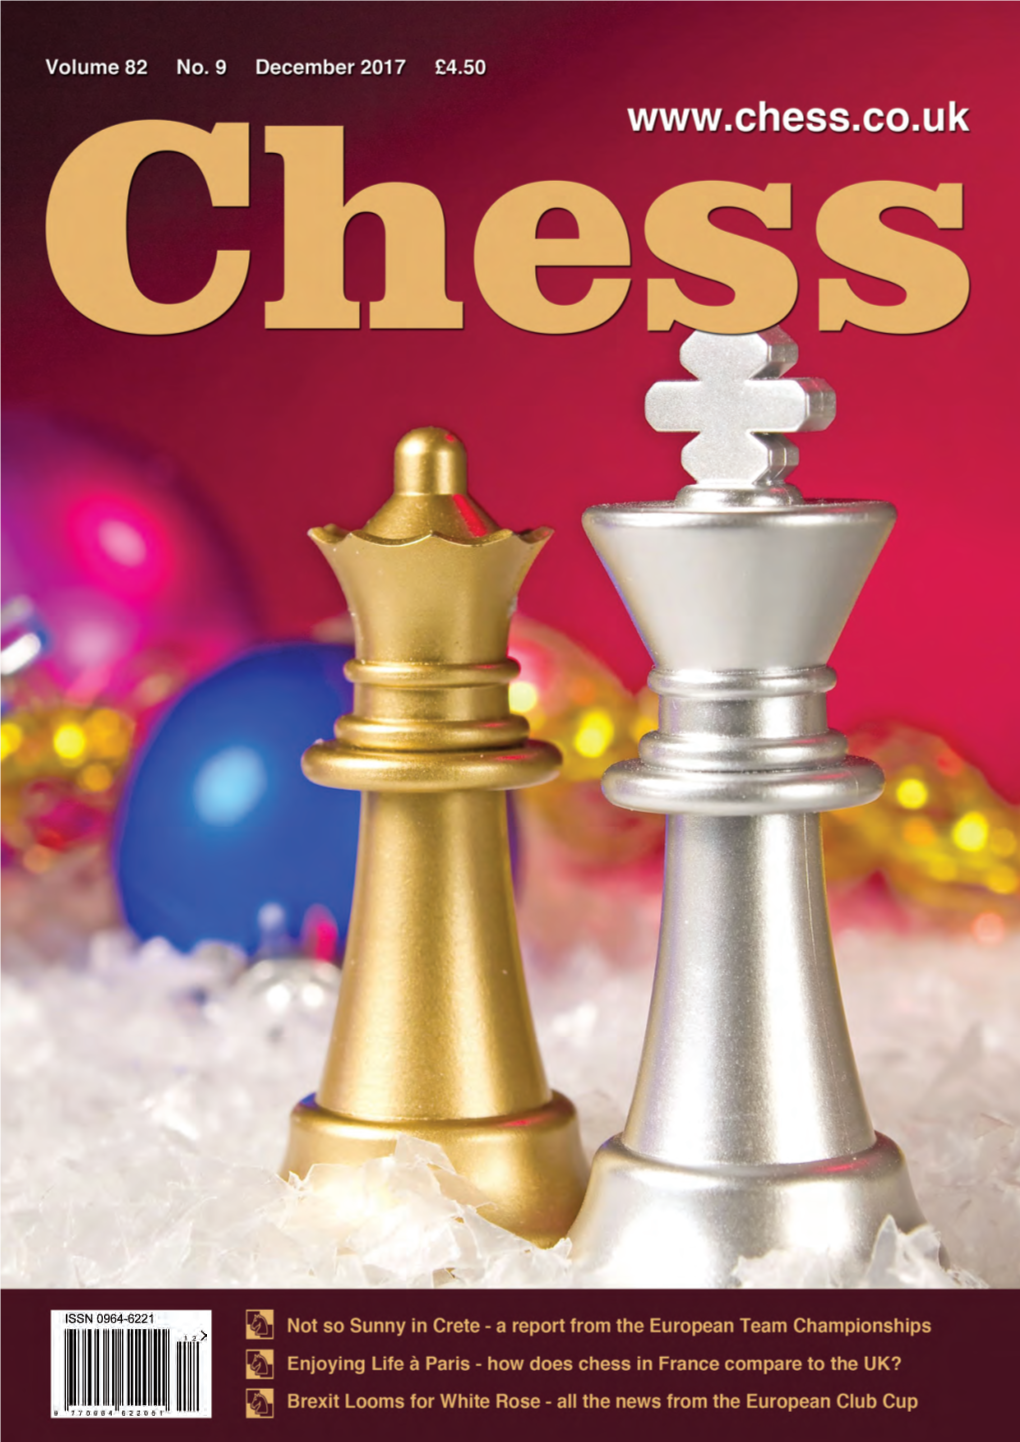 Chess Mag - 21 6 10 13/11/2017 21:36 Page 3